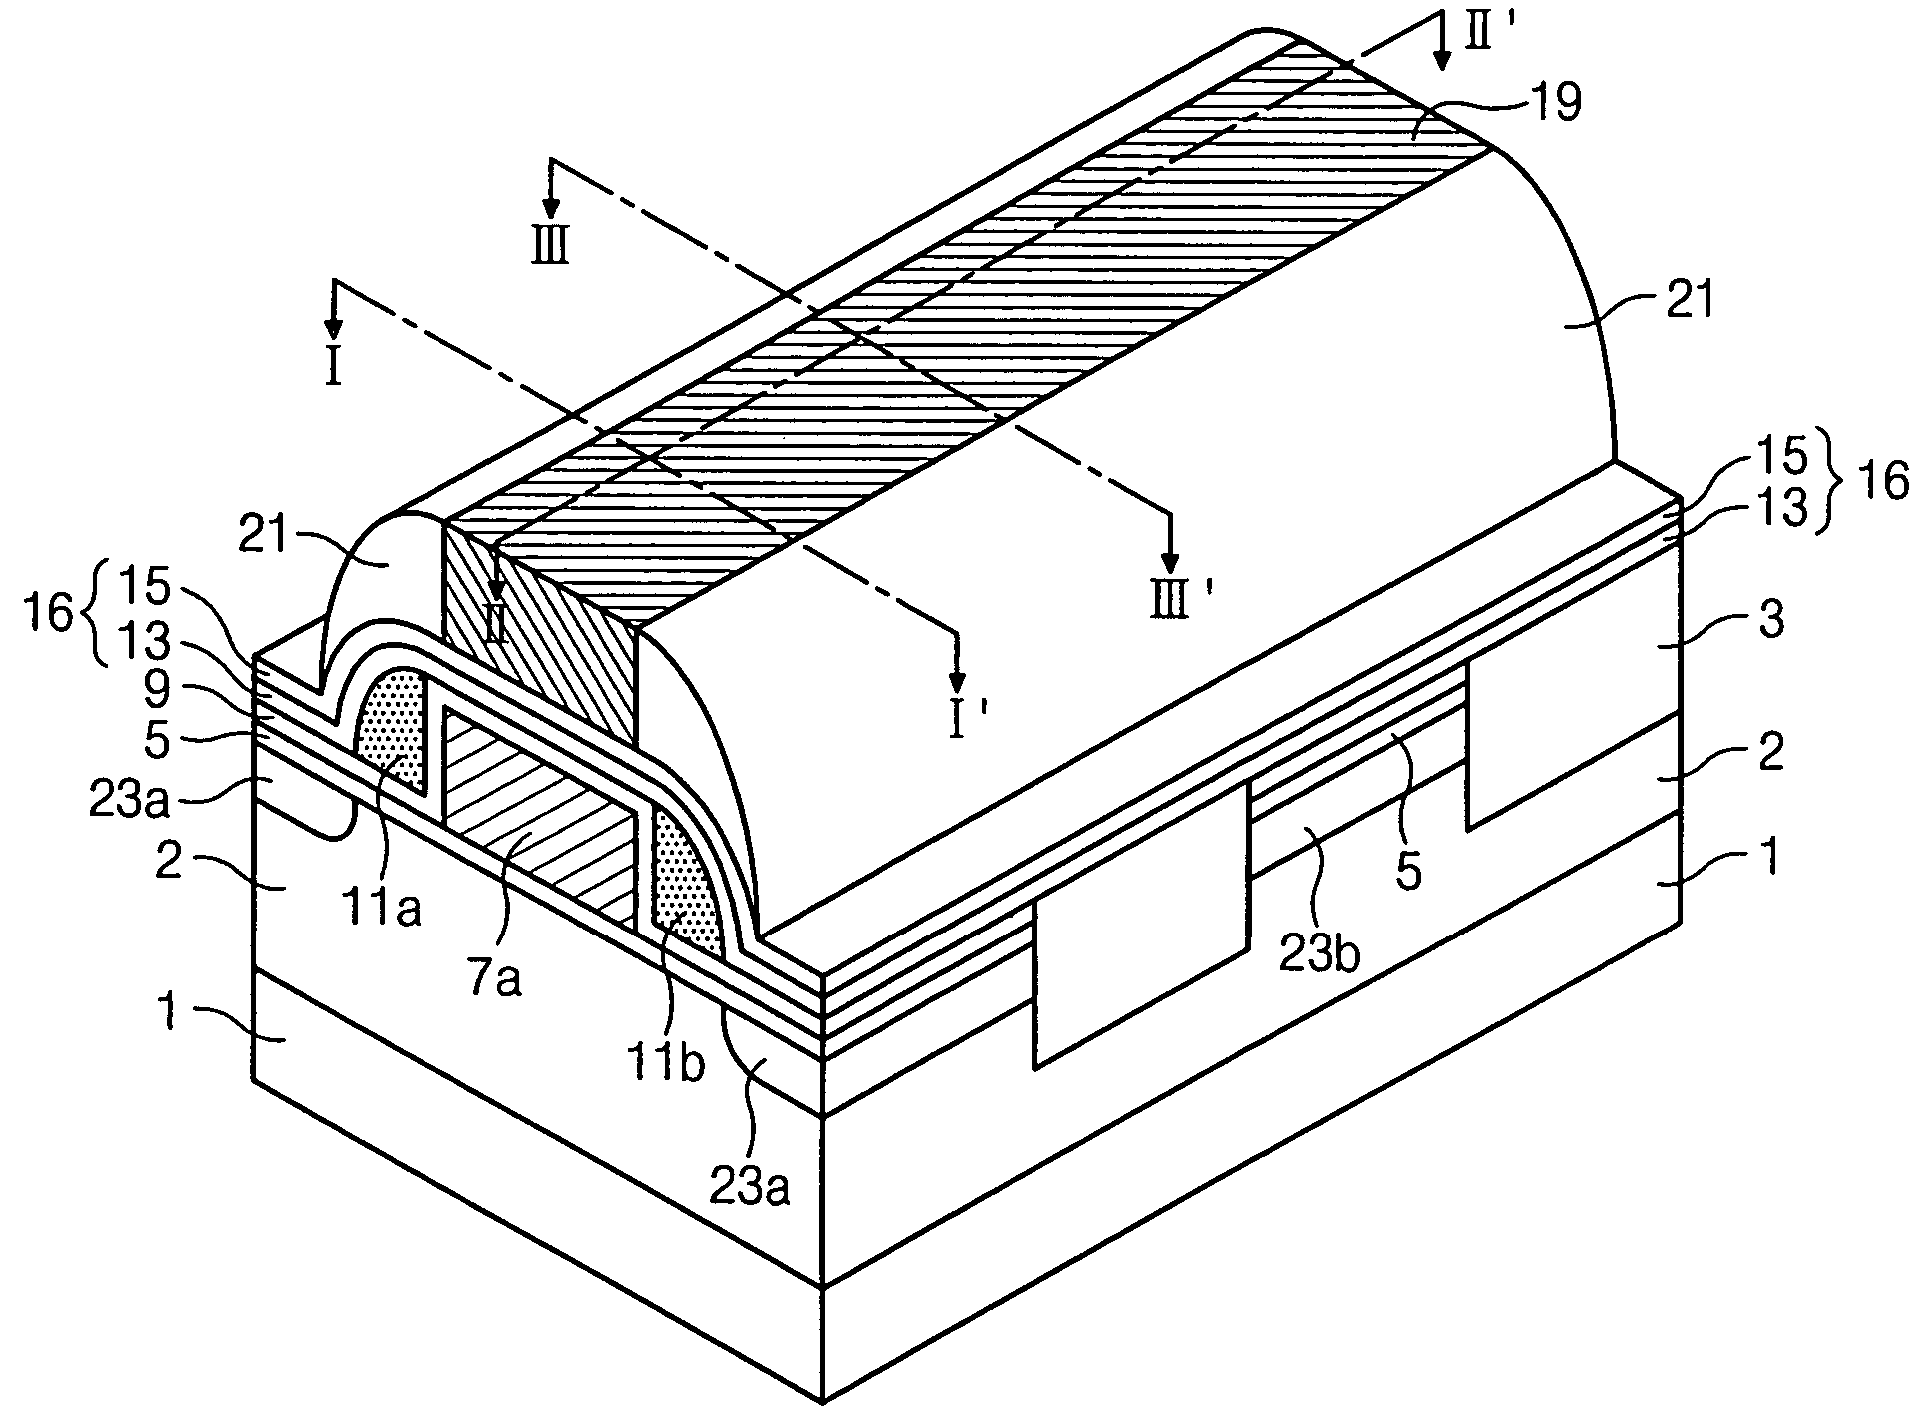 Non-volatile memory device and methods of forming and operating the same